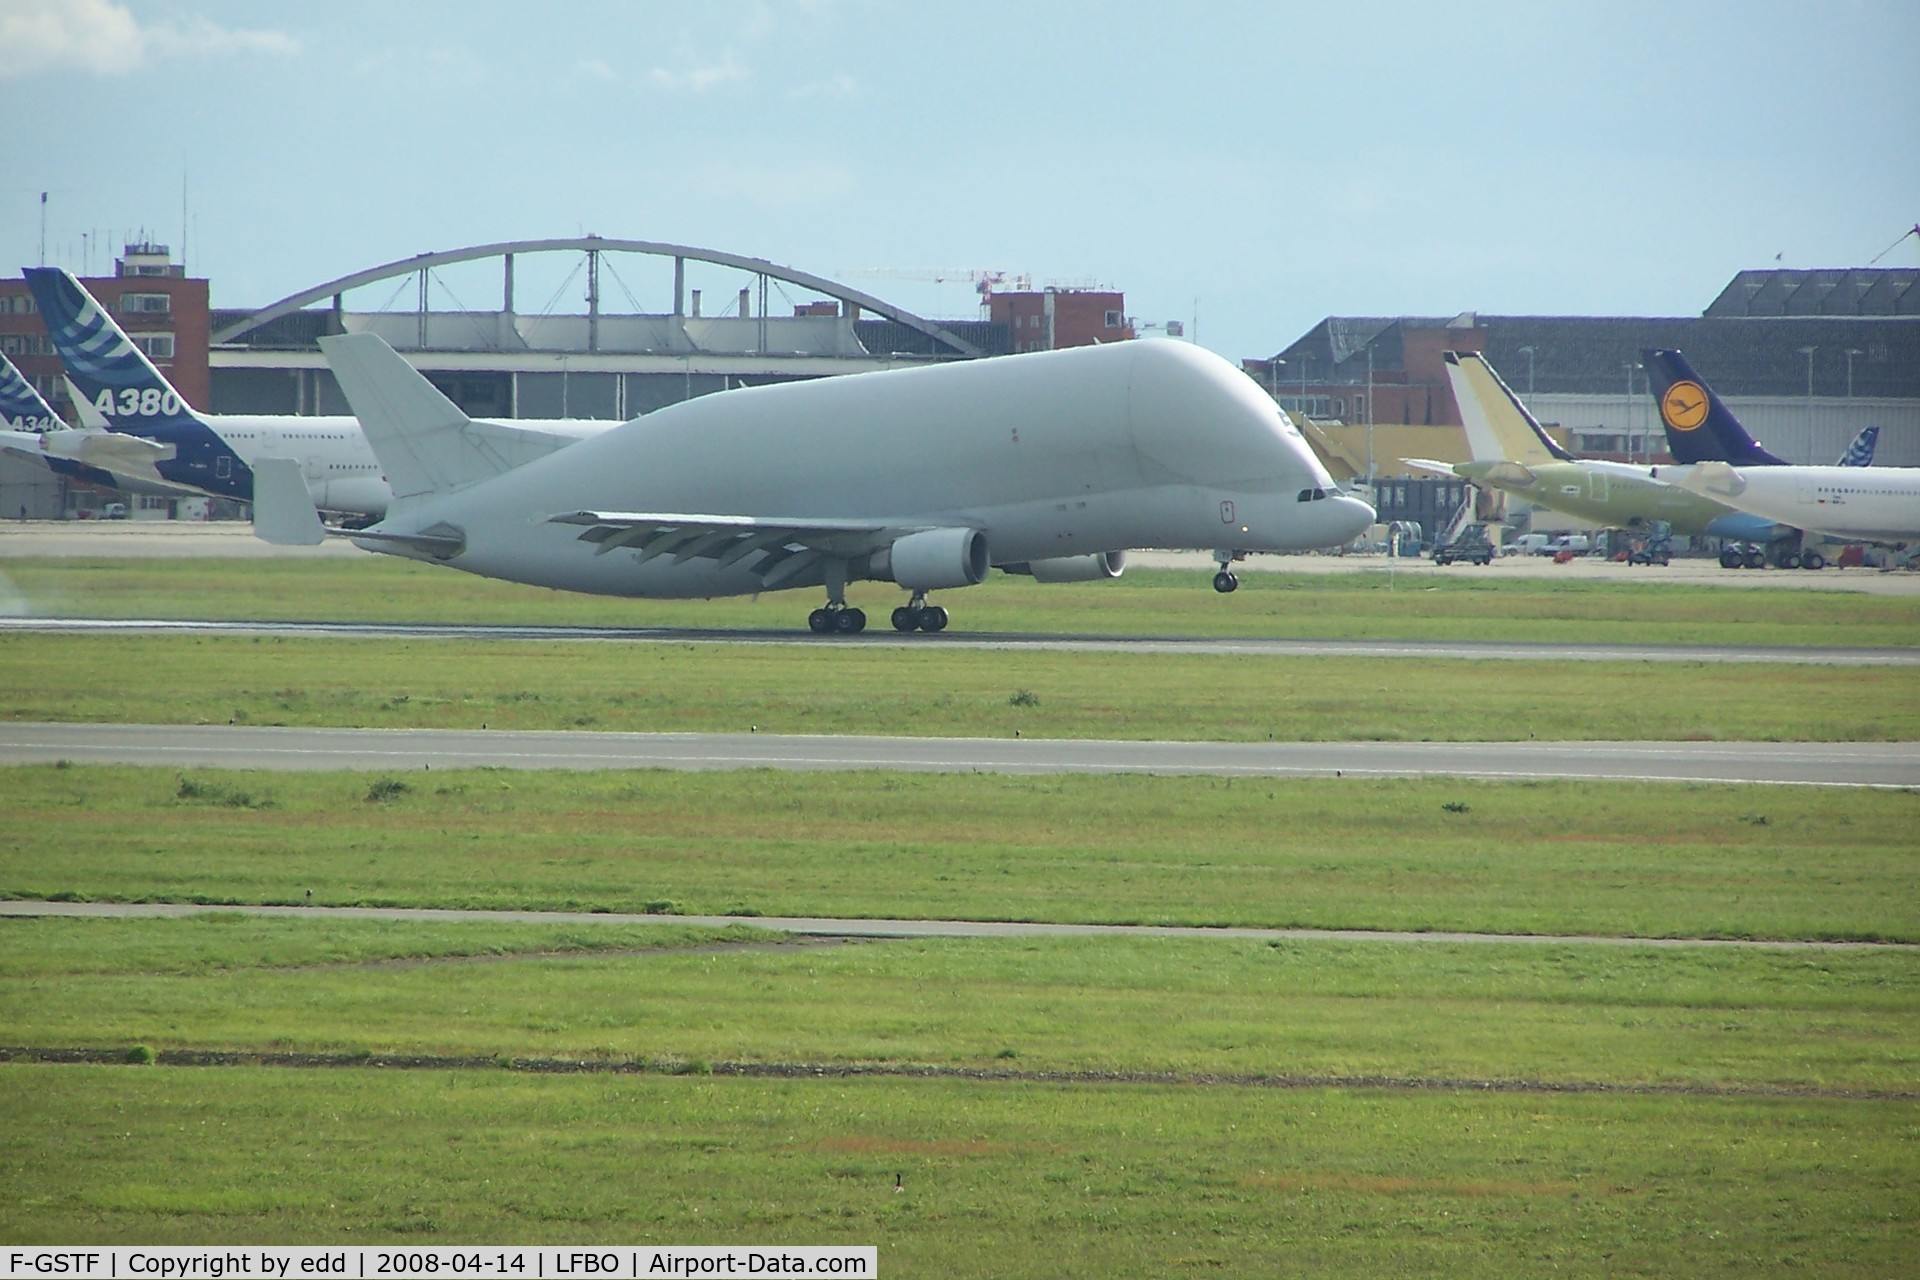 F-GSTF, 2000 Airbus A300B4-608ST Super Transporter C/N 796, JUST LANDED COMING IN FROM BREMEN